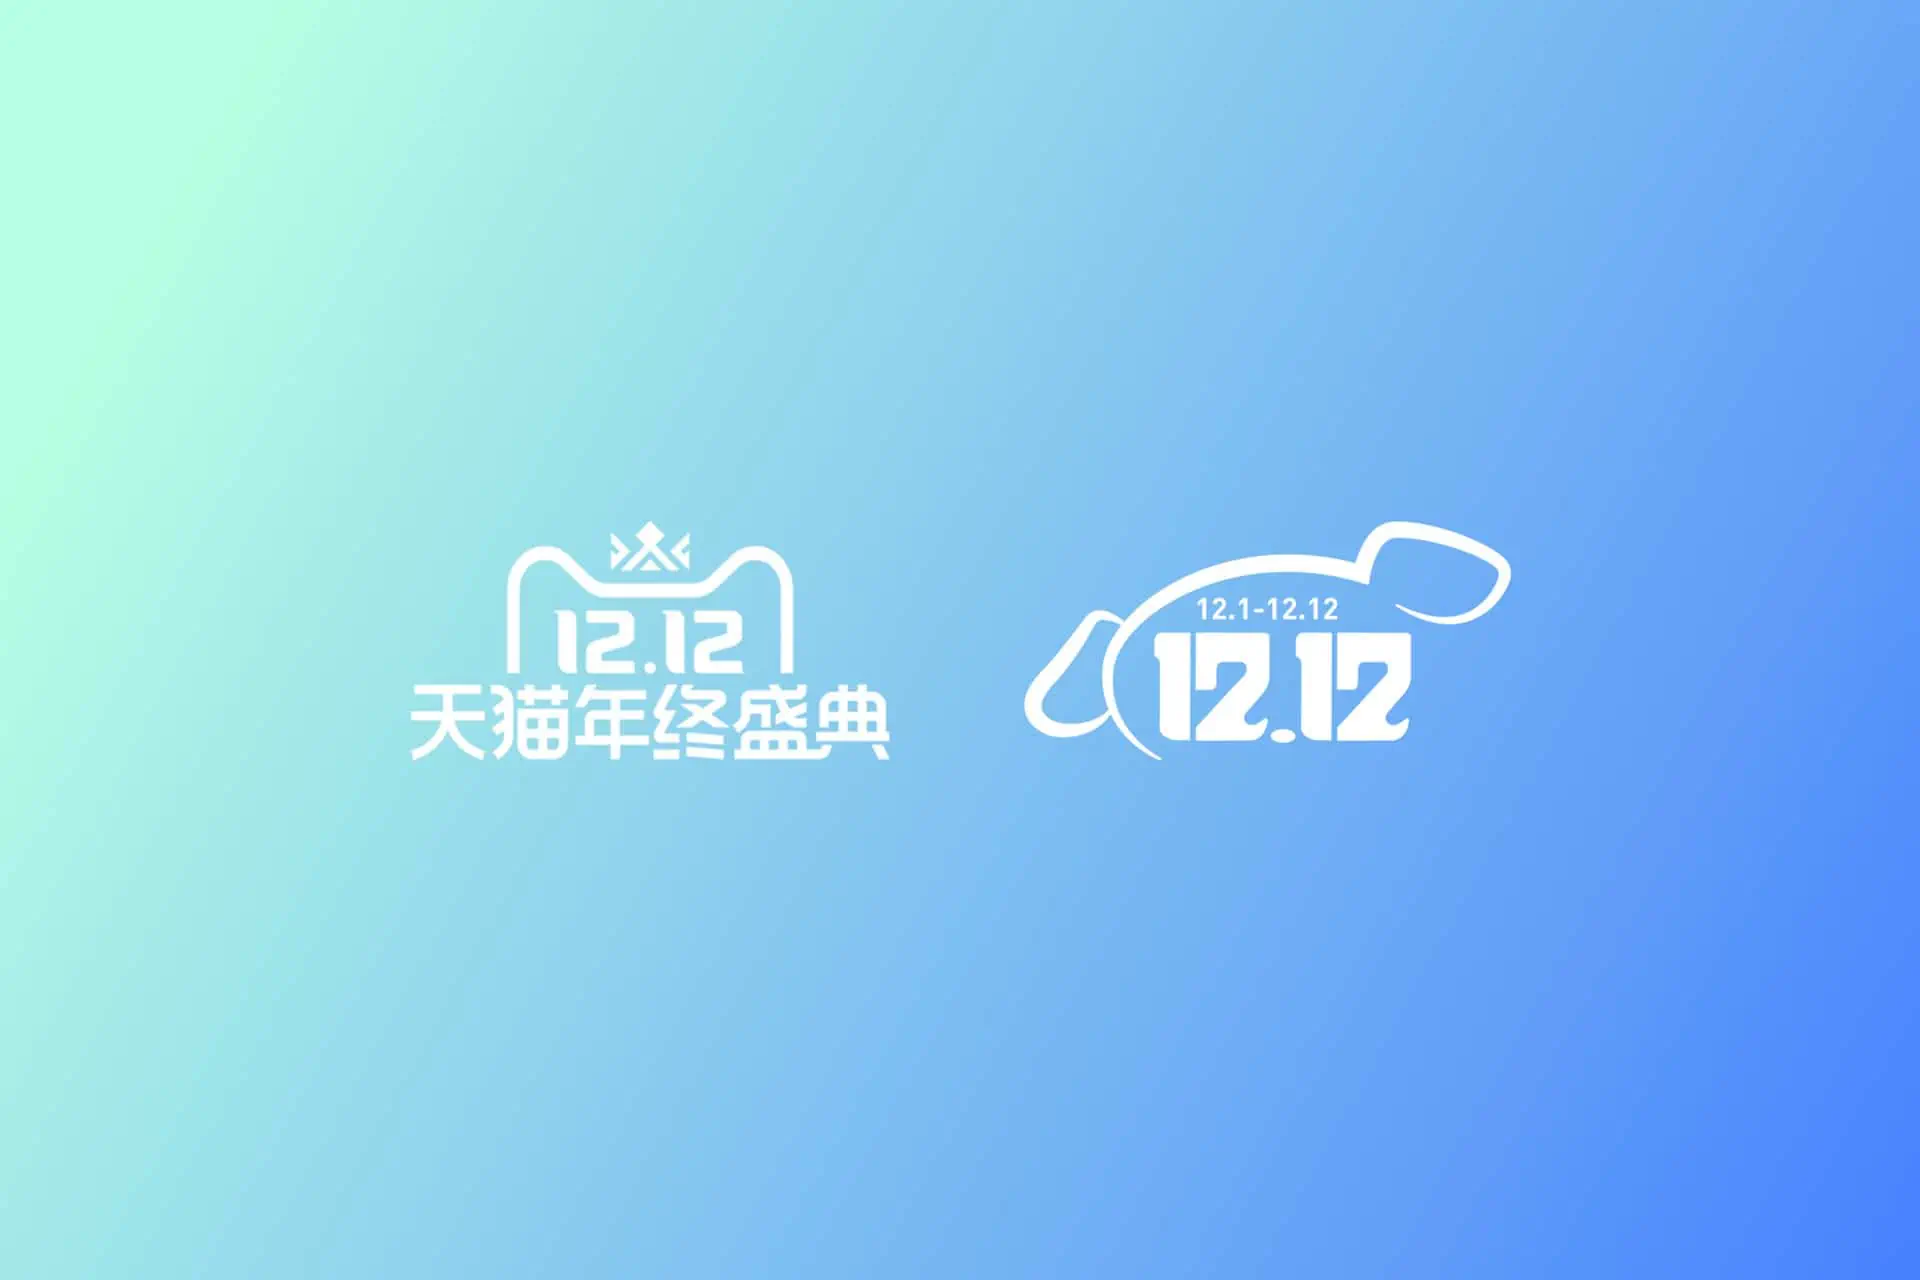 Double 12 Shopping Festival, a continued online shopping celebration